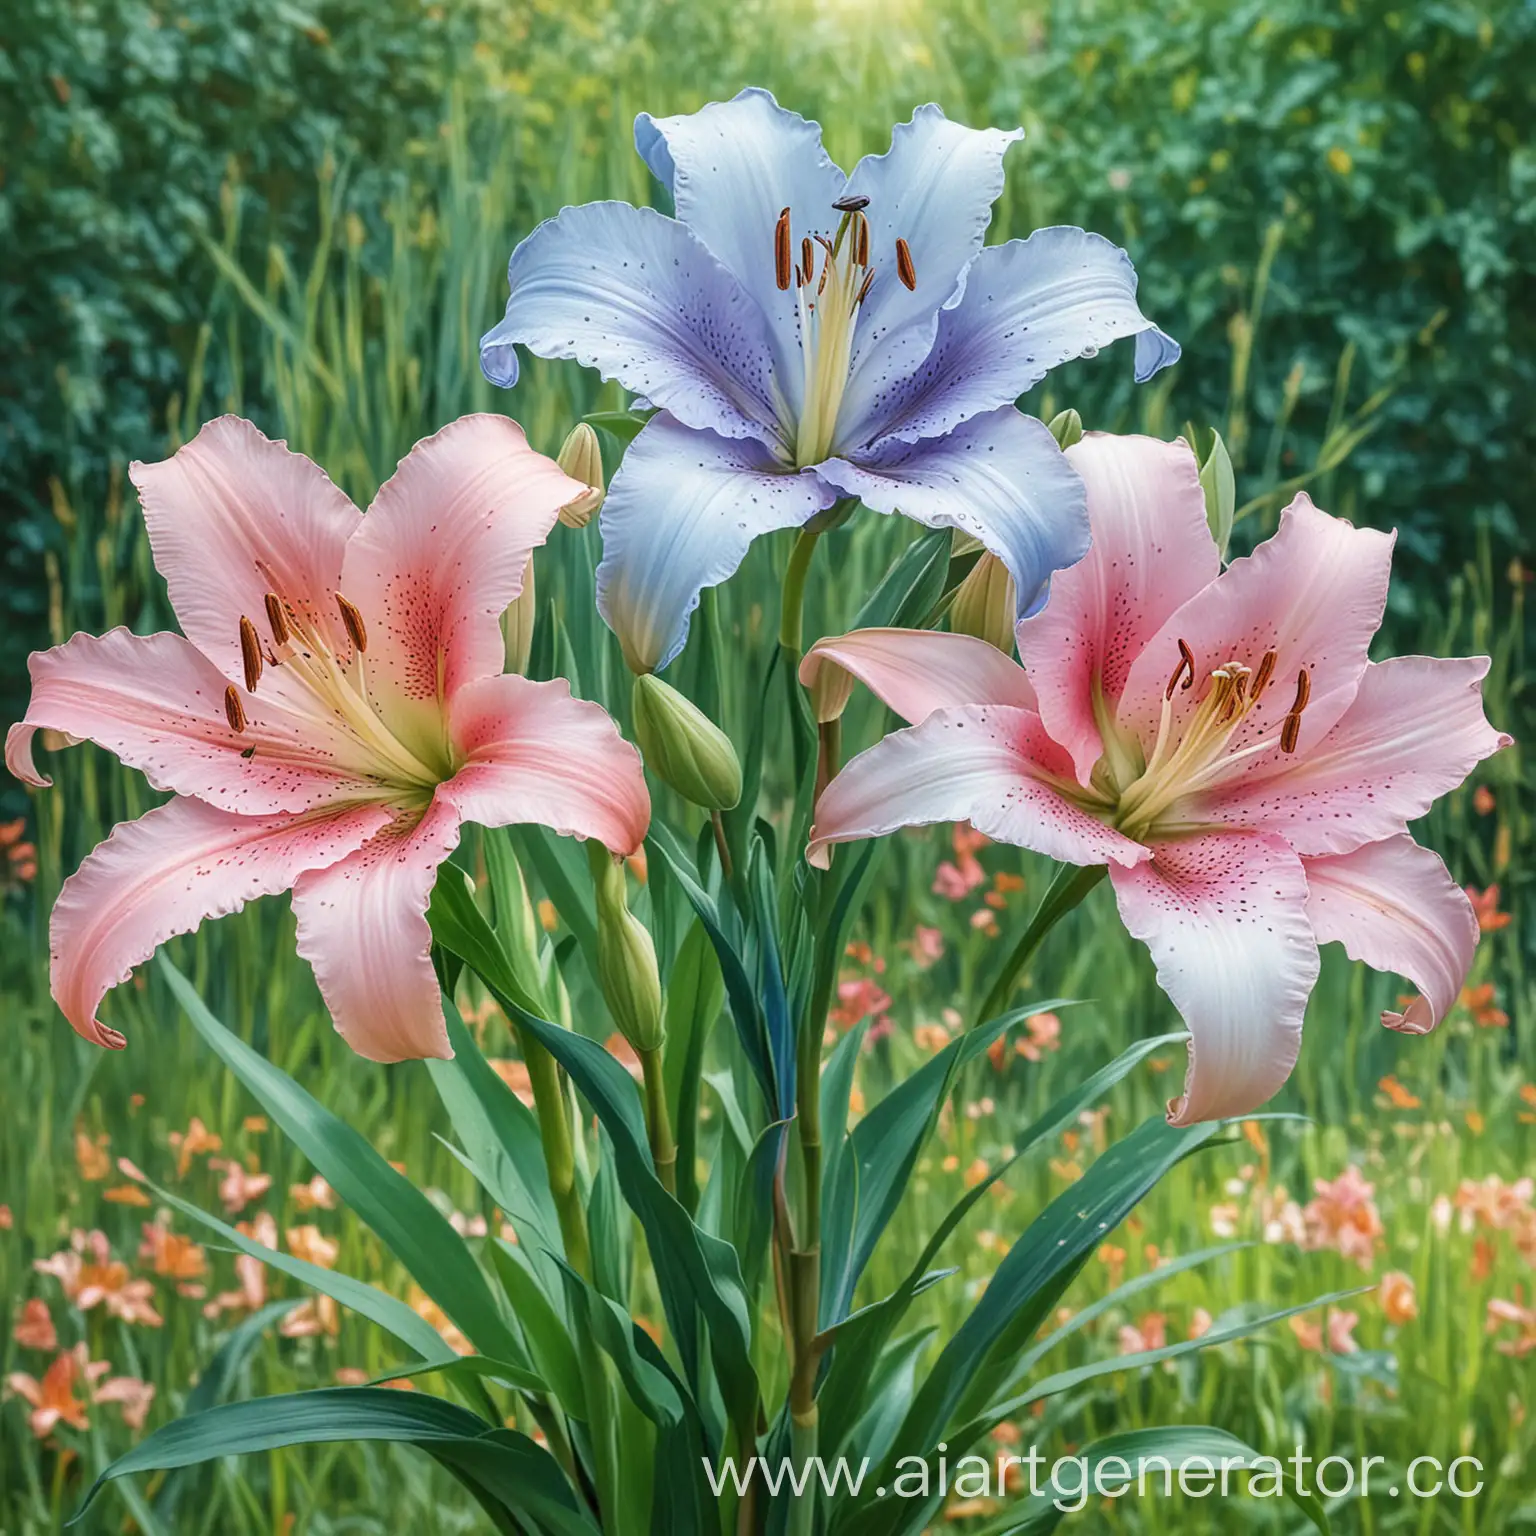 Vibrant-Trio-of-Lilies-Blue-Pink-and-White-Blossoms-Against-Lush-Greenery